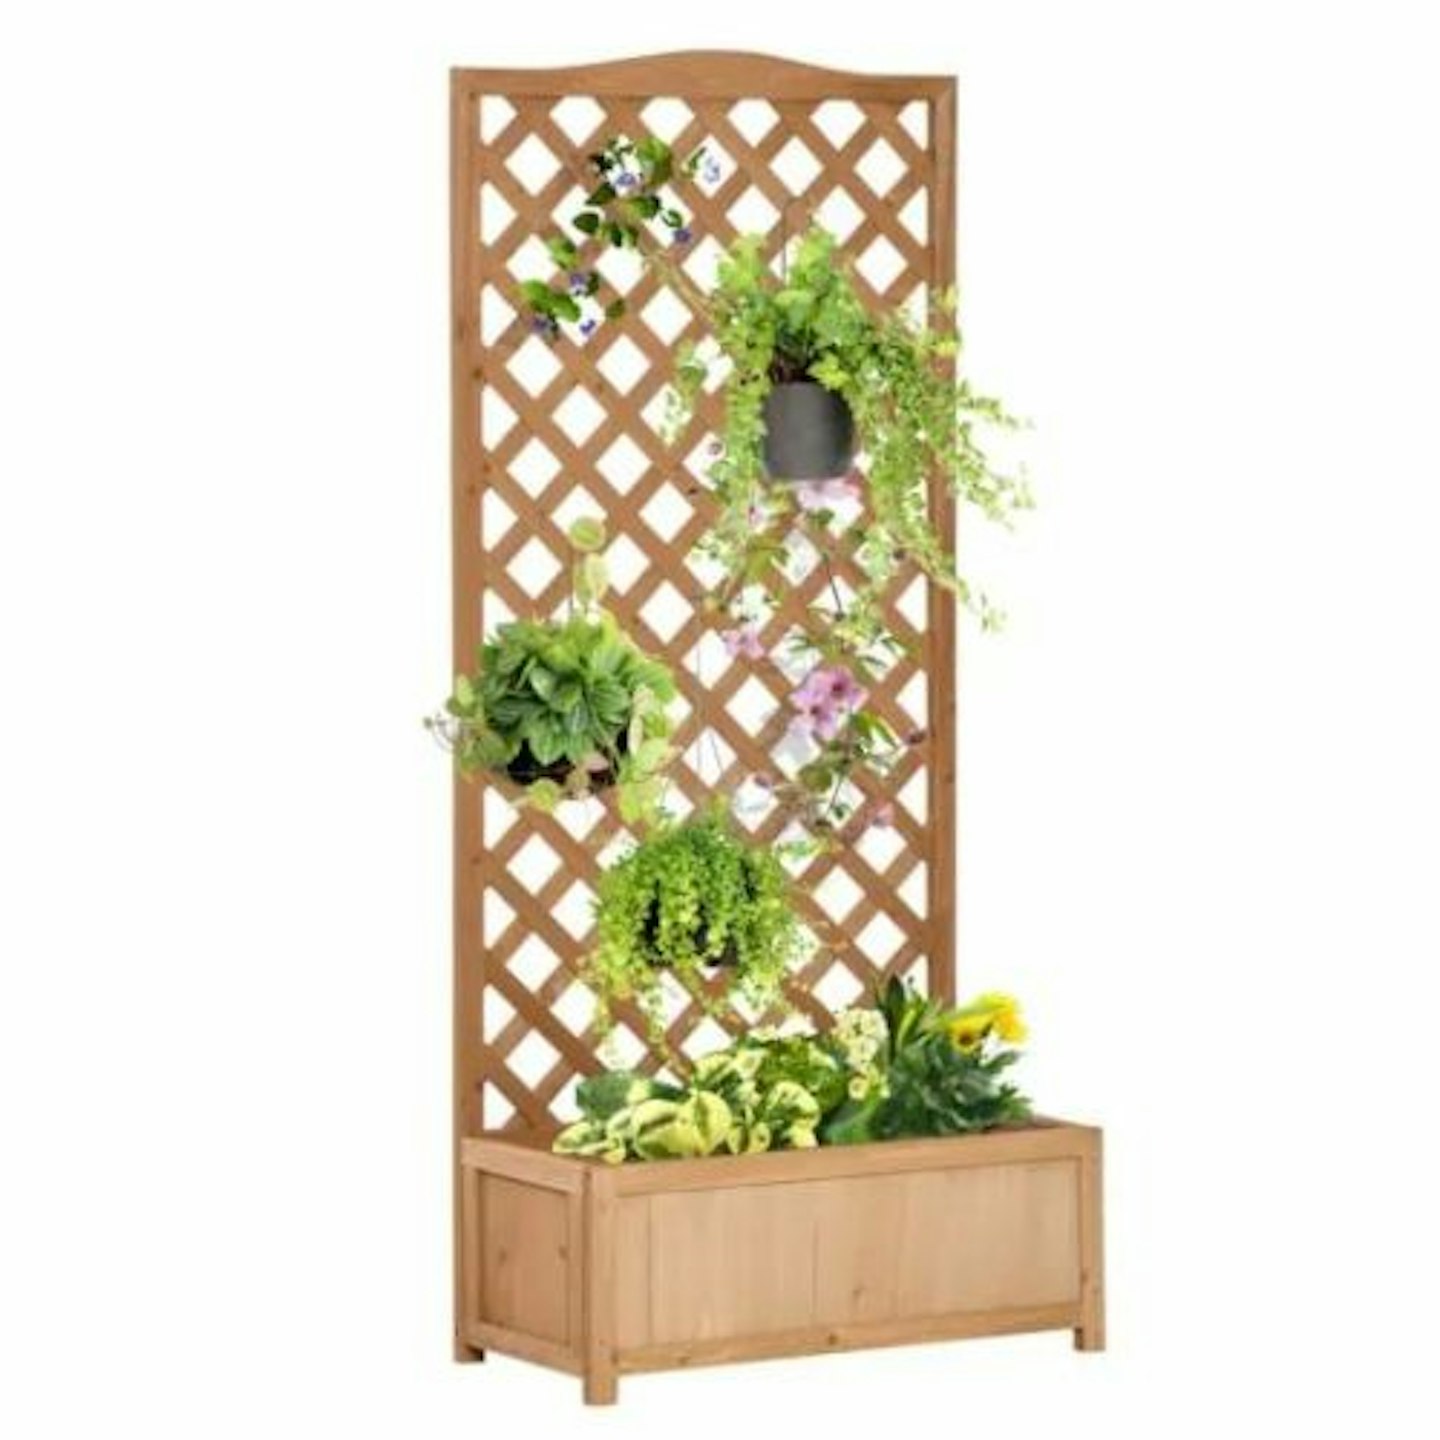 Outsunny Garden Wooden Planter Box With Trellis Flower Raised Bed 76X36X170Cm - Brown